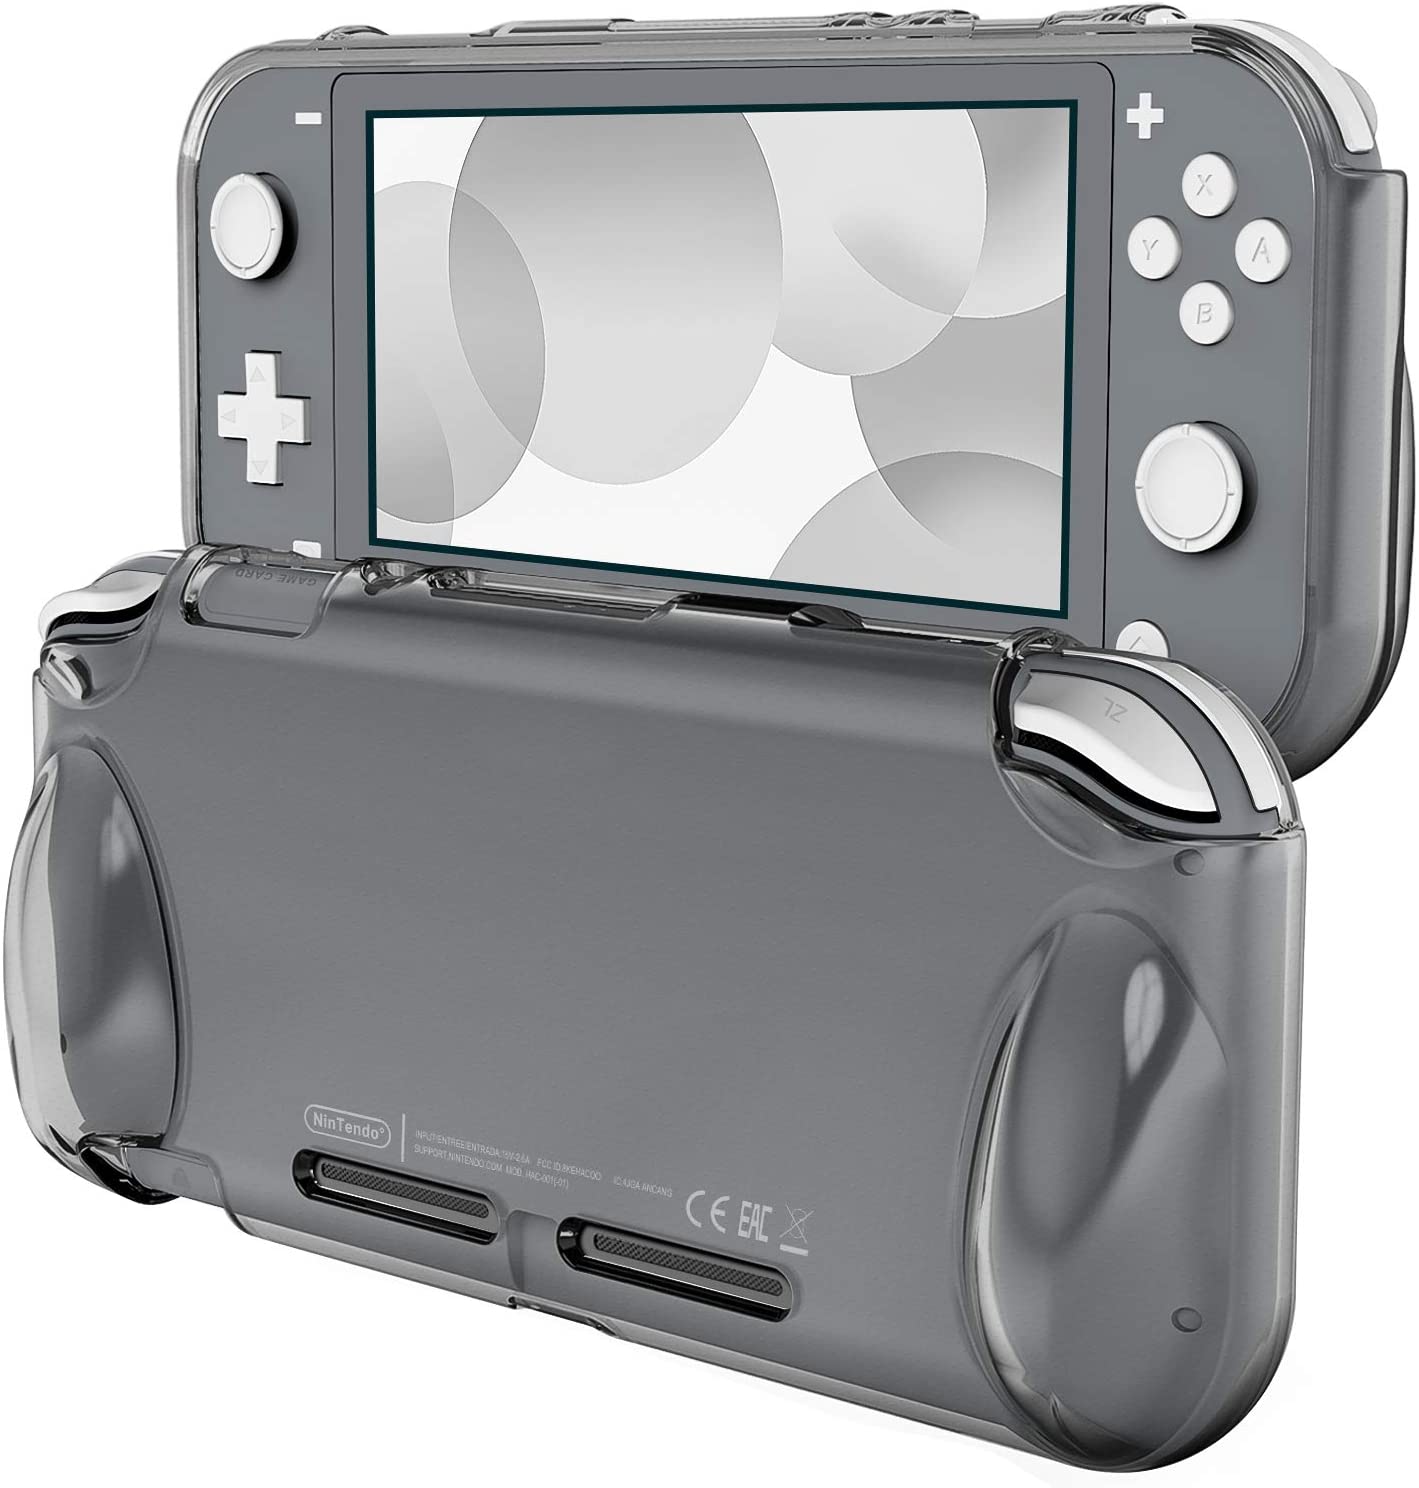 JETech Protective Case for Nintendo Switch Lite 2019, Grip Cover with Shock-Absorption and Anti-Scratch Design, Grey - e4cents